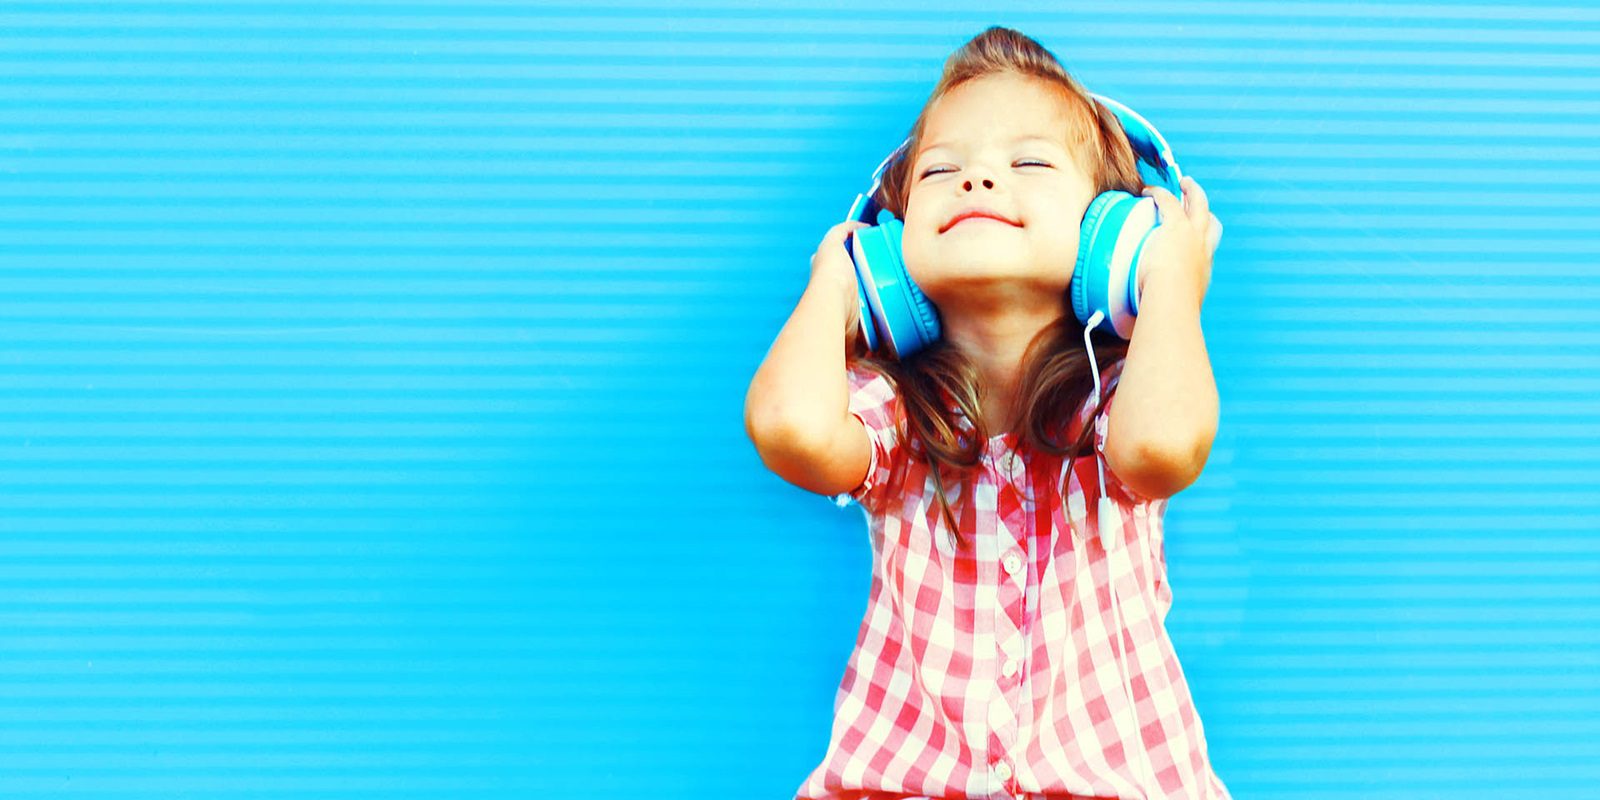 Headphones and hearing damage: teaching my child to protect their ears